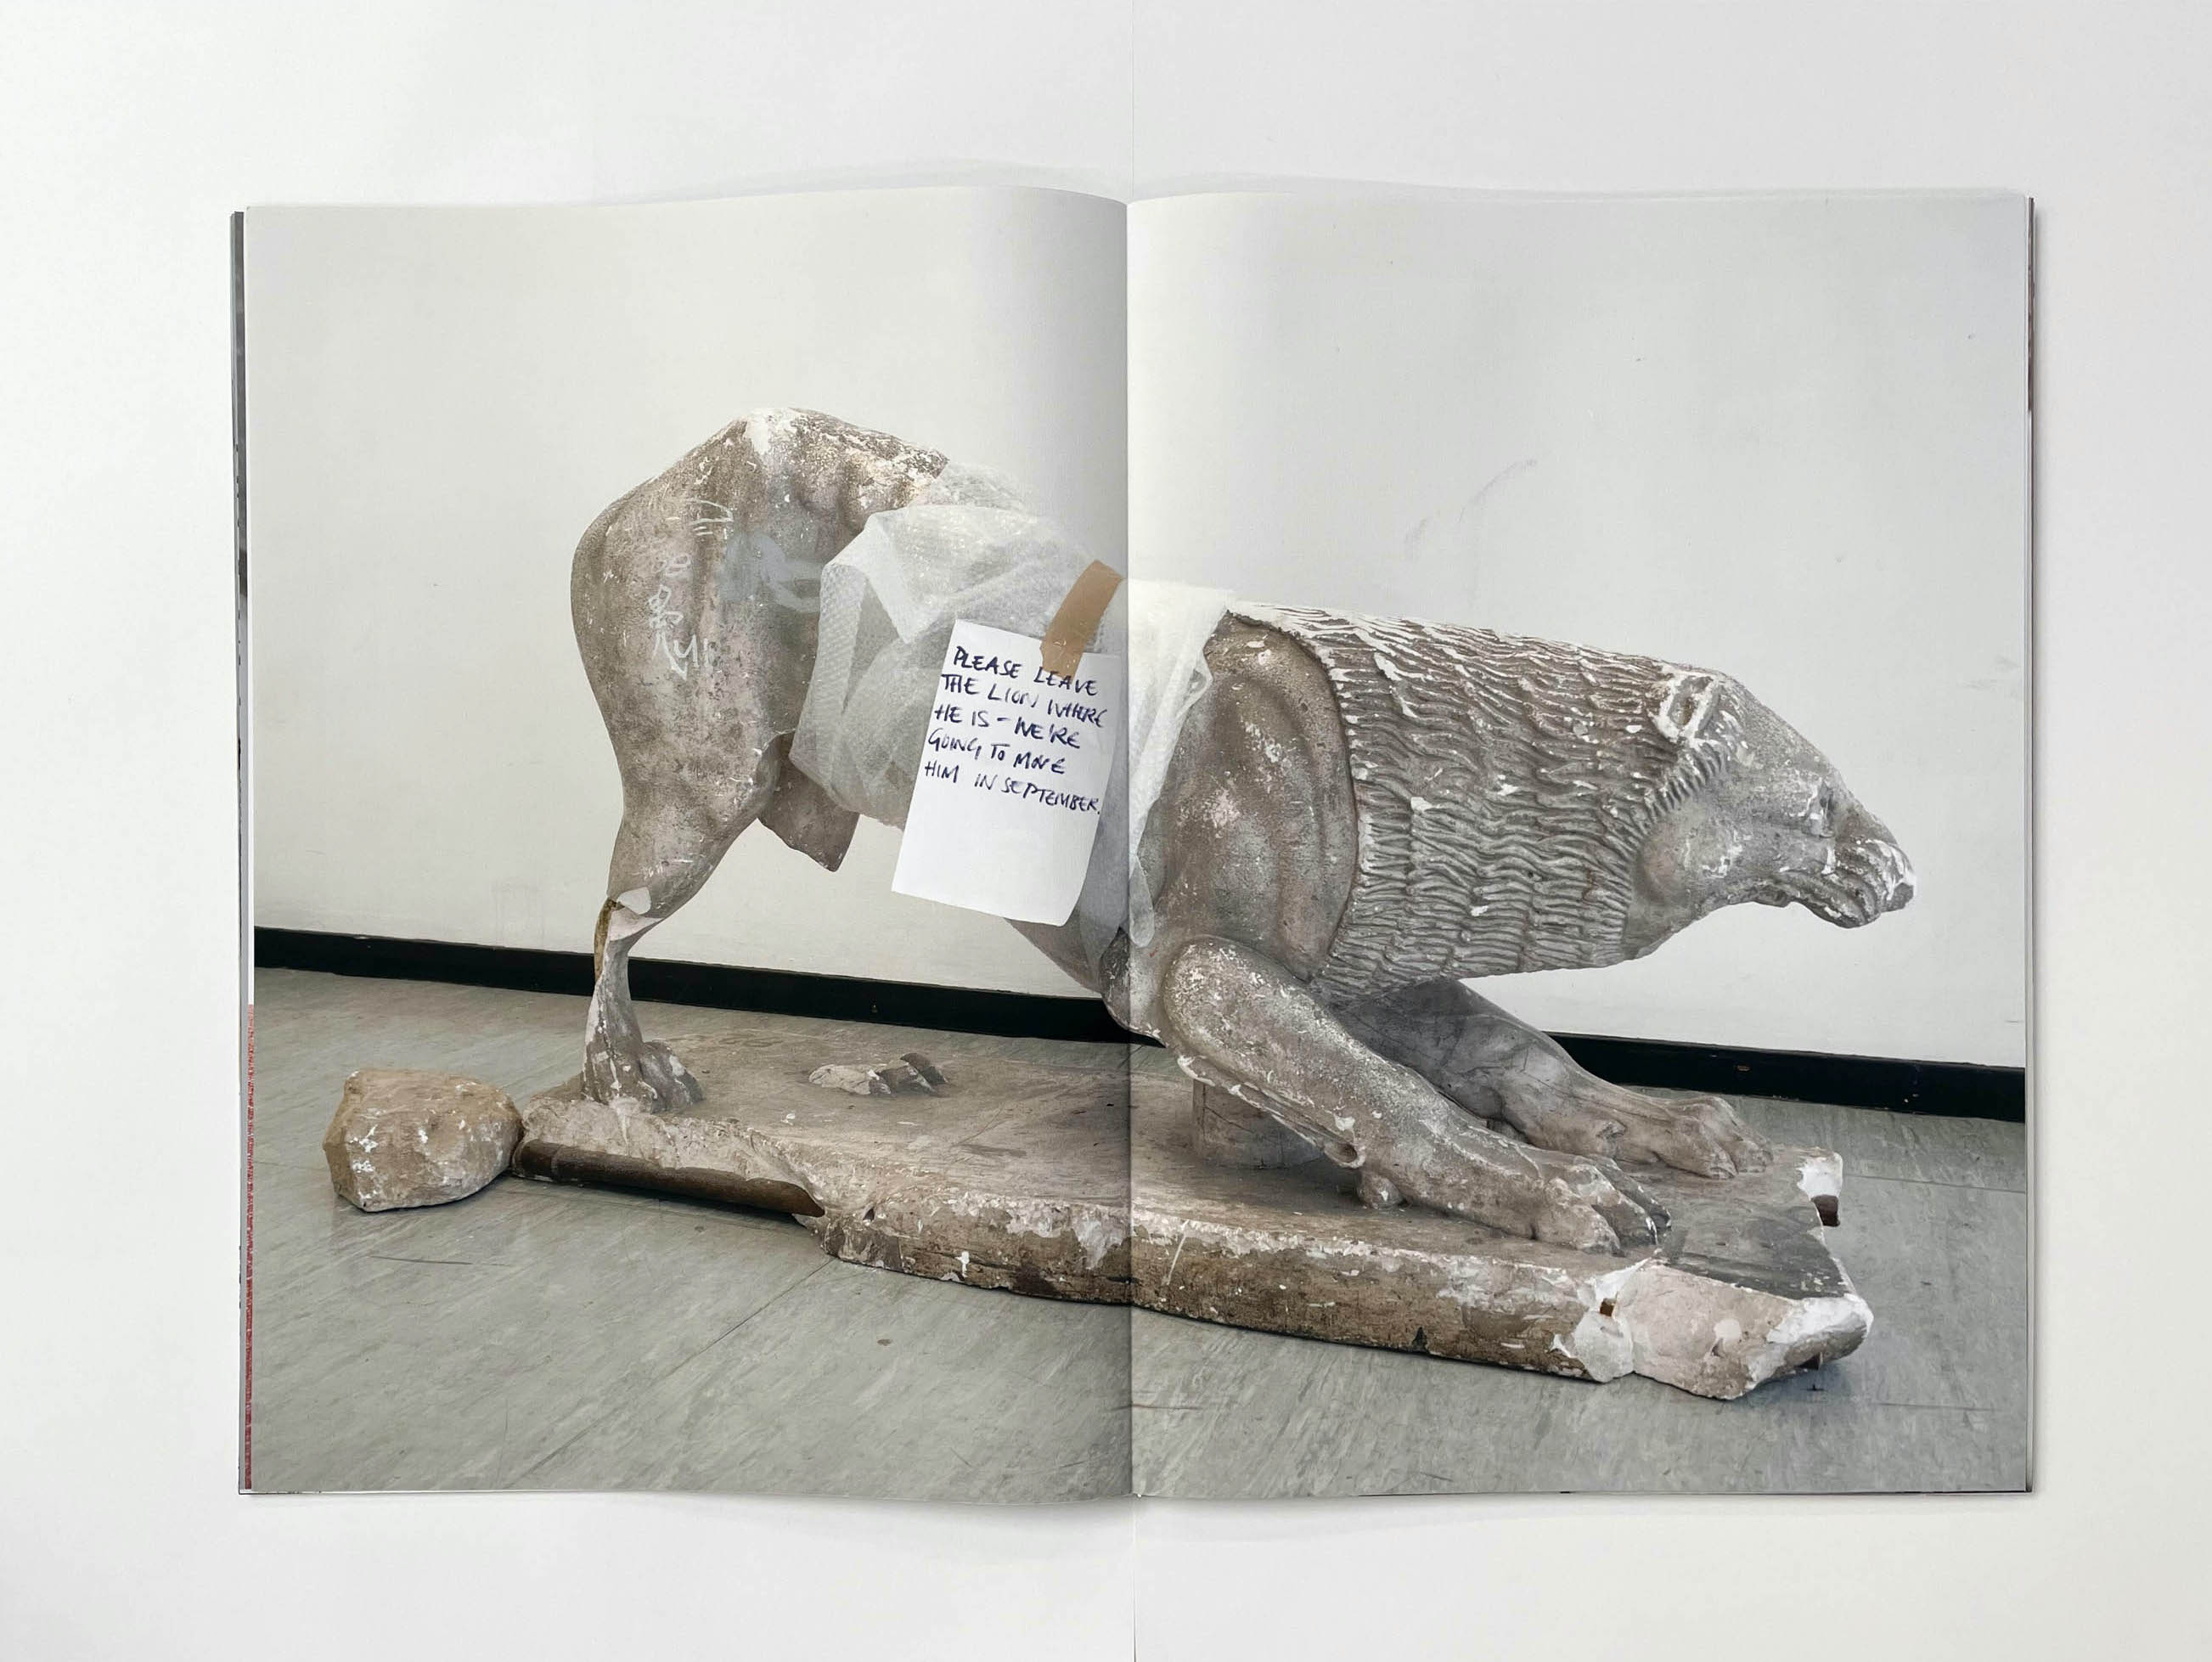 a plaster cast statue of a large old lion crouches on a floor, a note pinned to its back says Please leave the lion where he is - we are going to move him in September